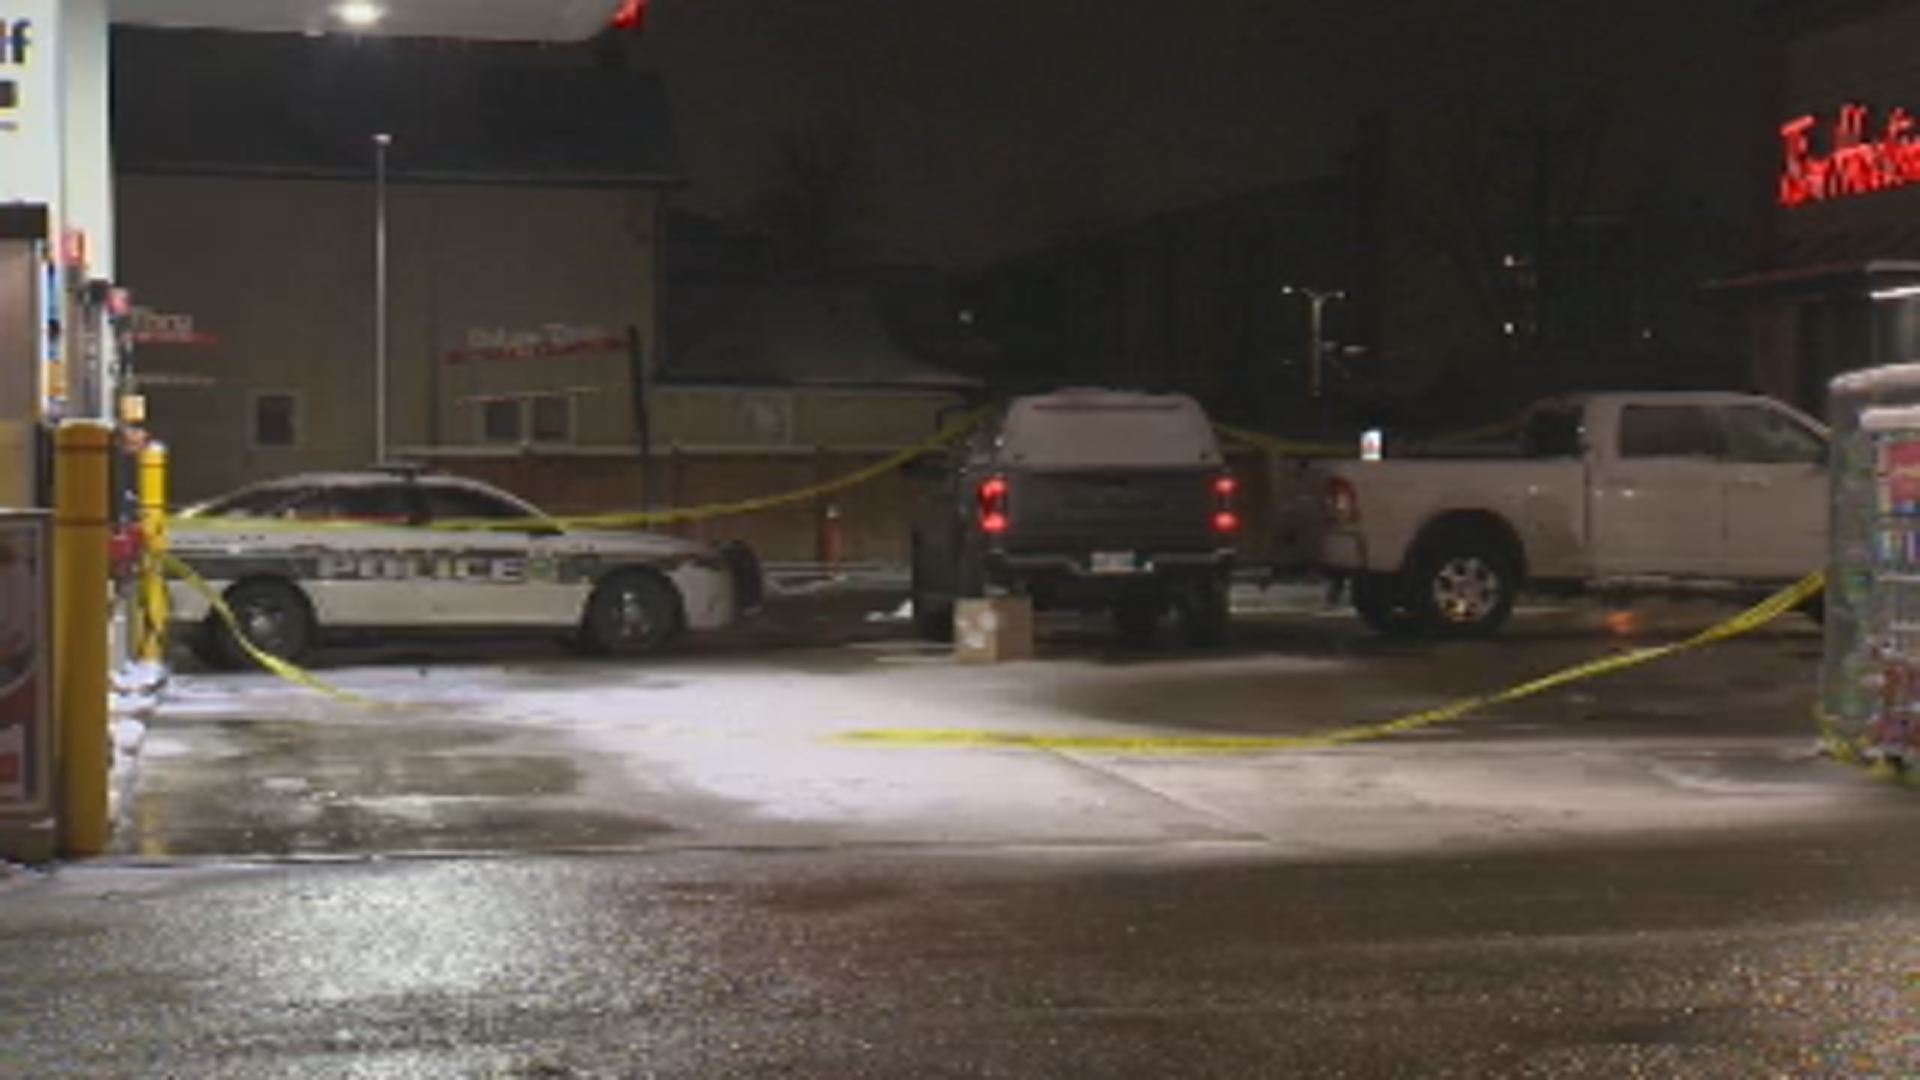 Police responded to a report of an assault with a weapon Friday night outside the Petro-Canada on Pandora Avenue West.